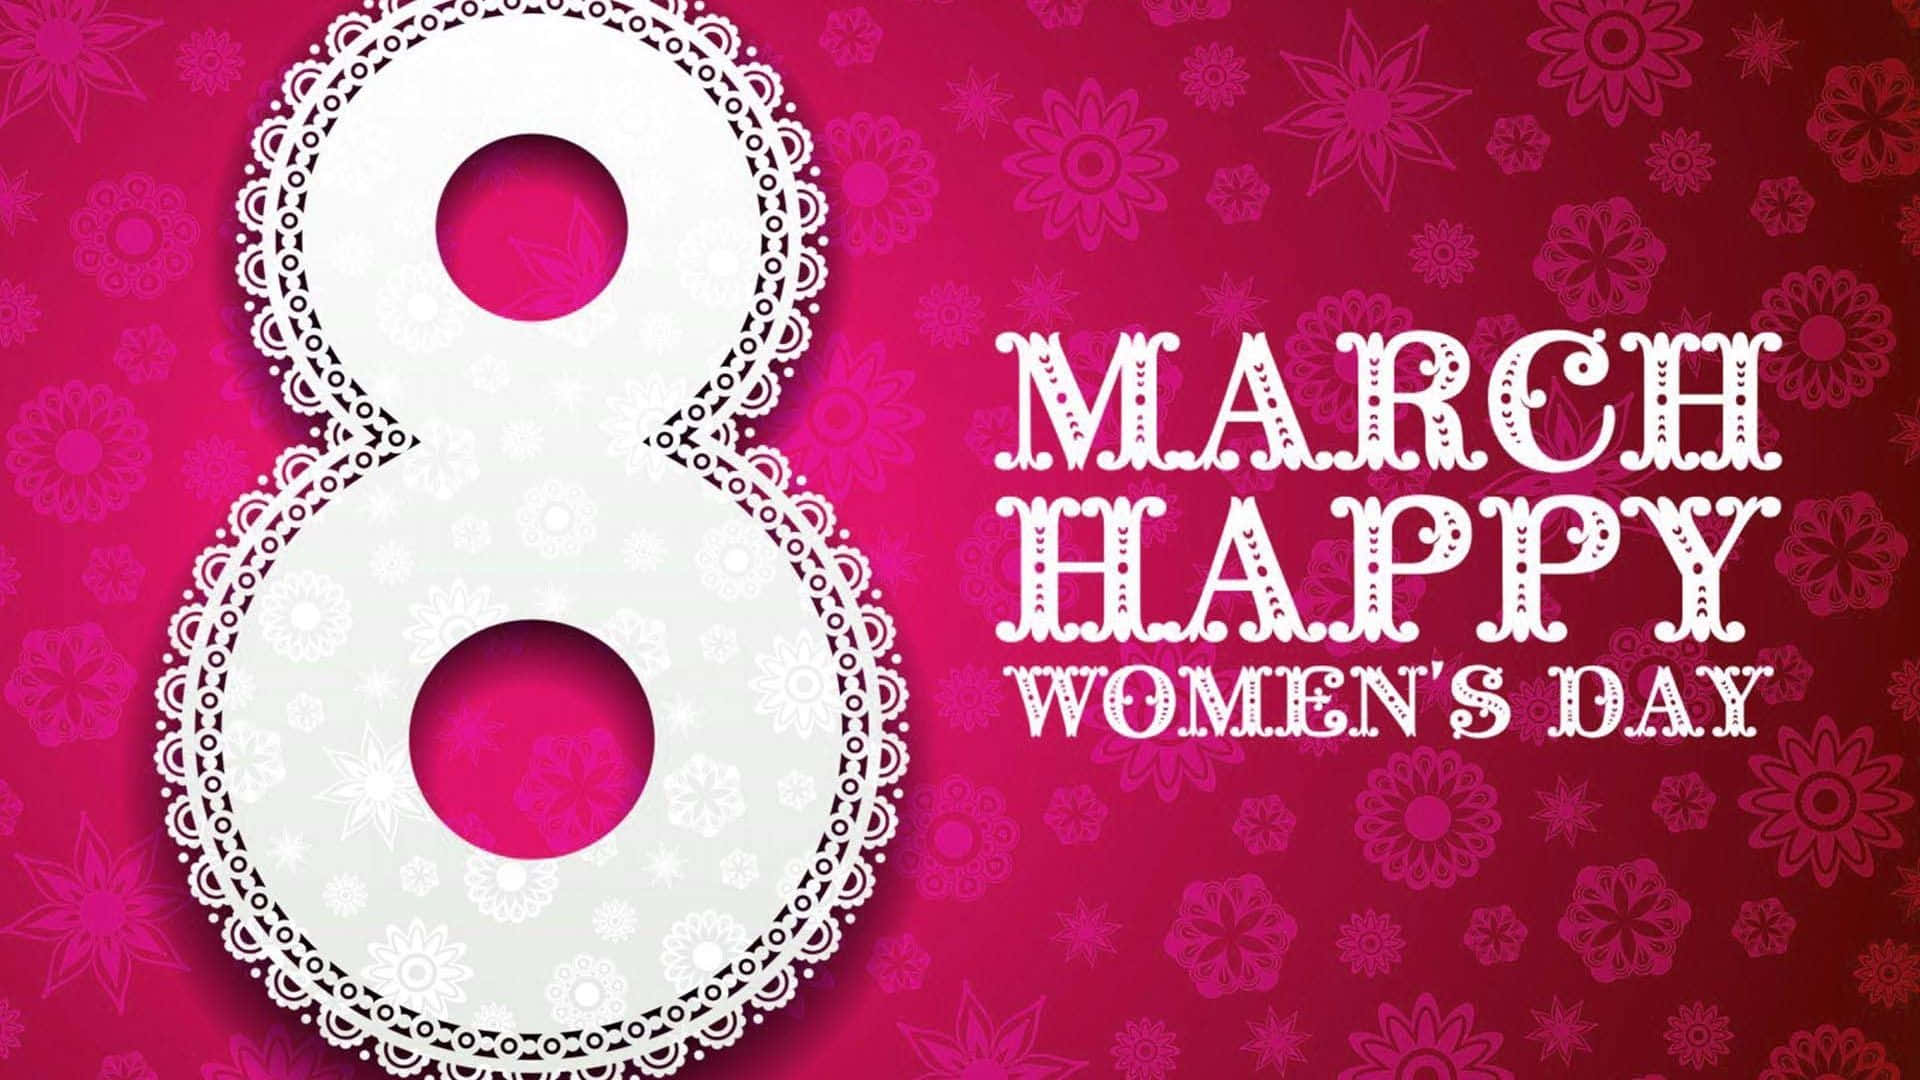 New Energy Happy Womens Day Picture